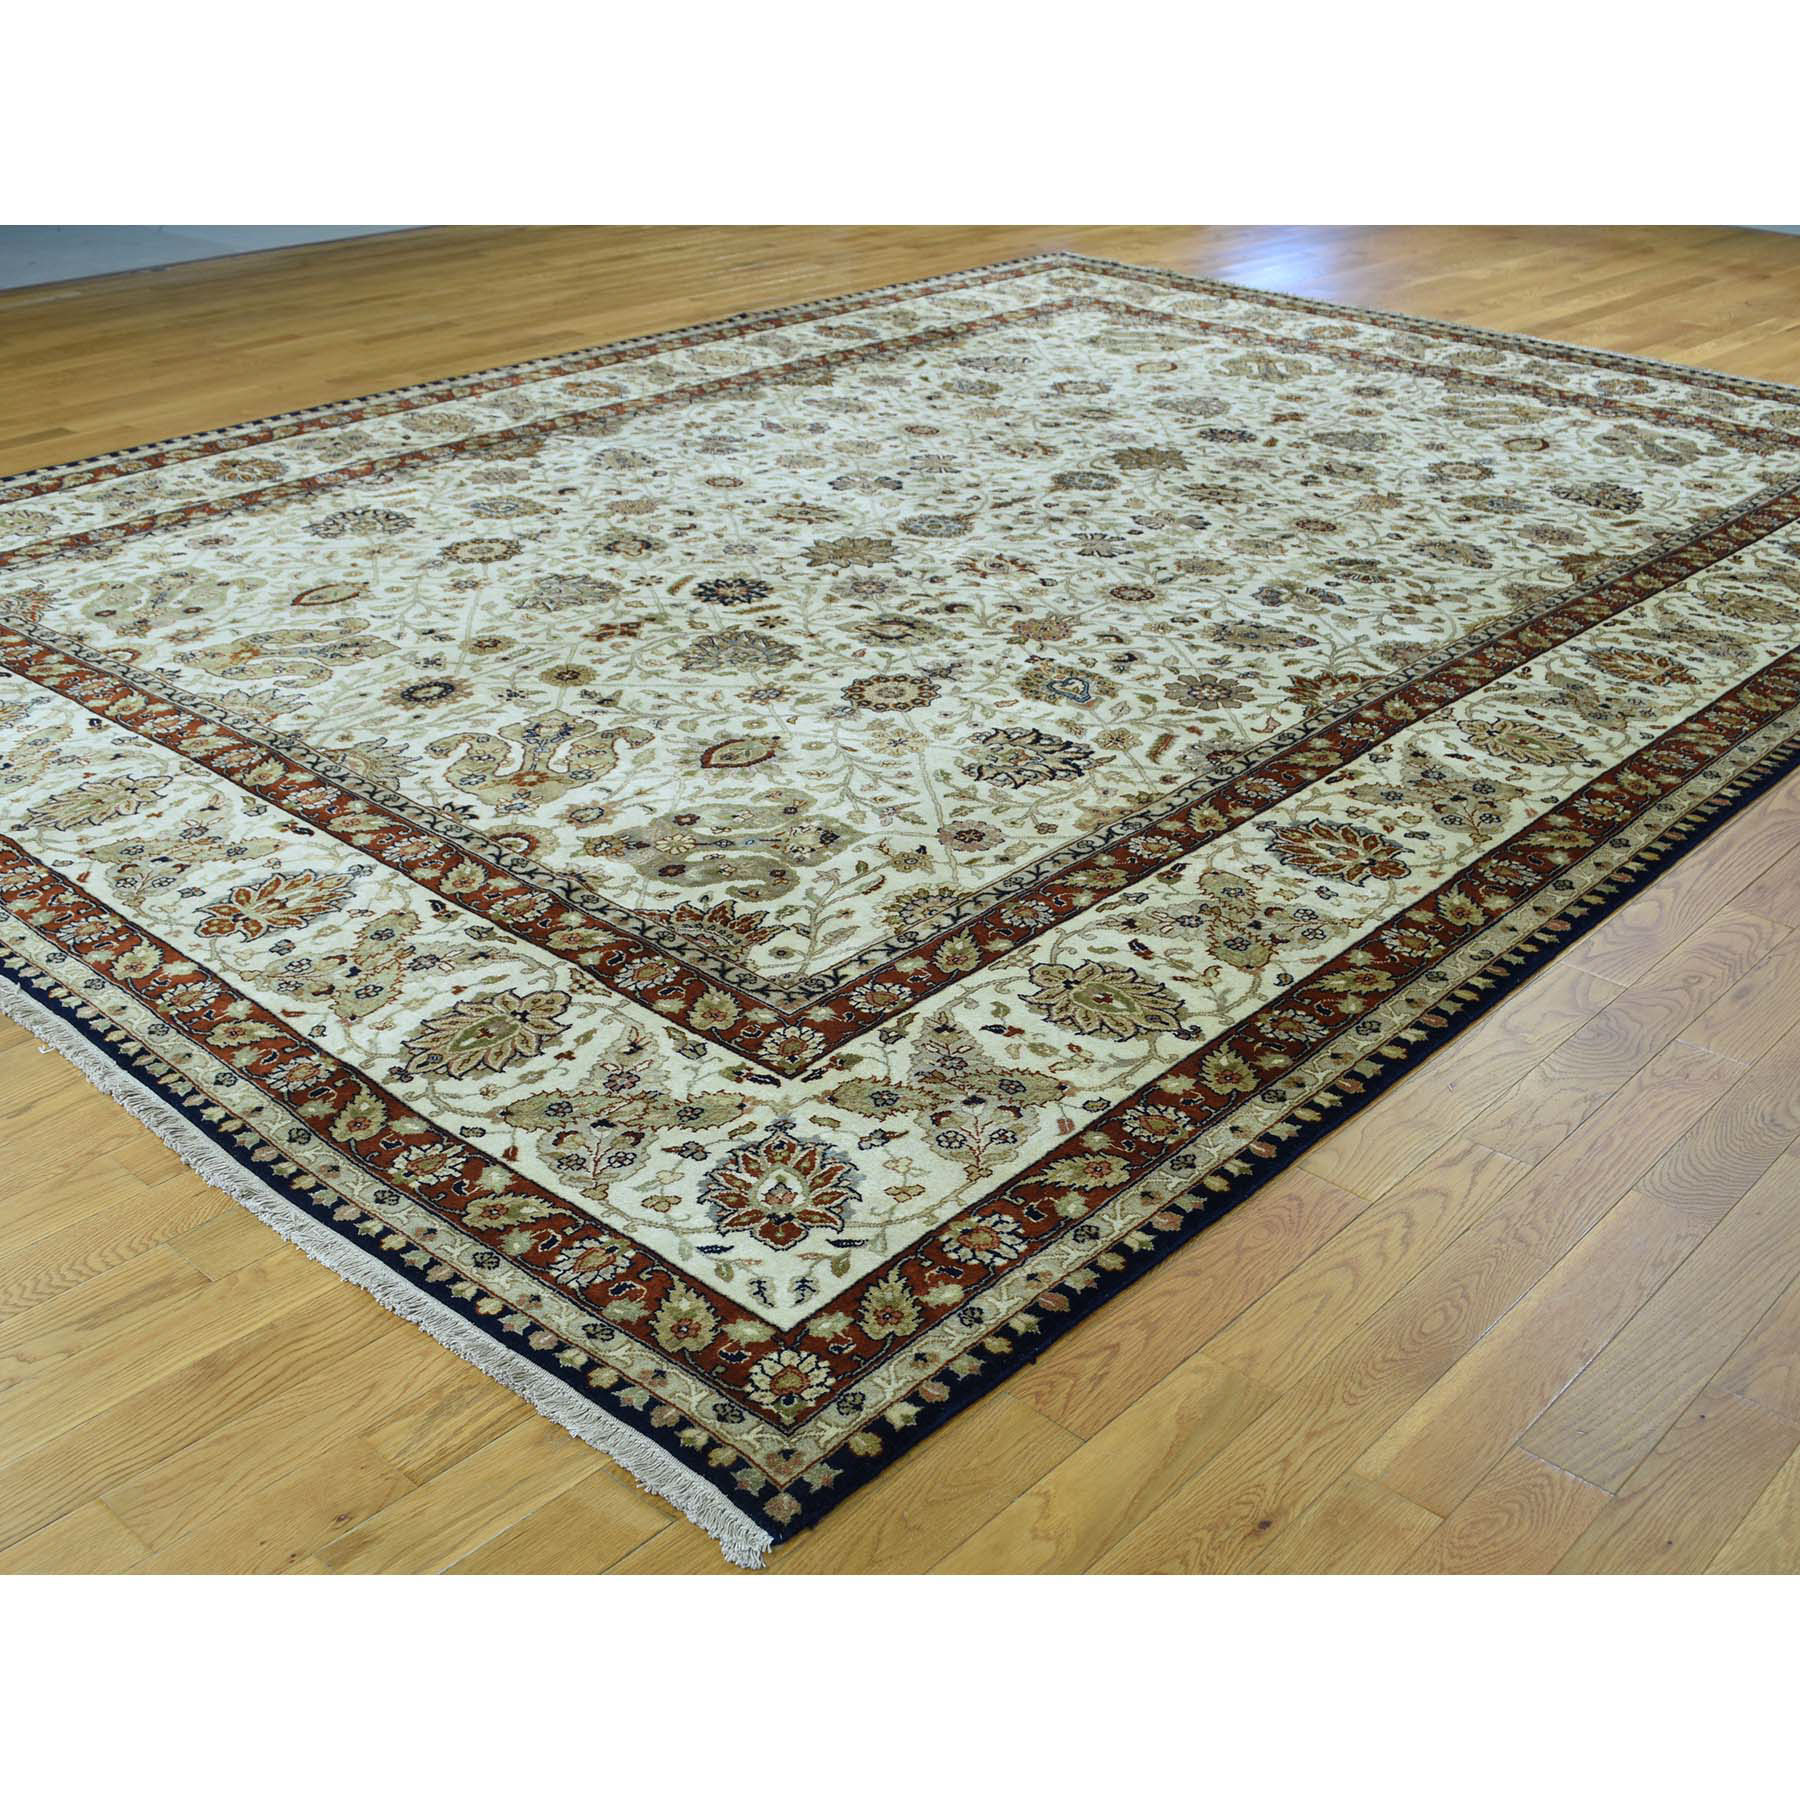 10-2 x13-7  Fine Oriental Pure Wool Antiqued Tabriz Hand-Knotted Rug 